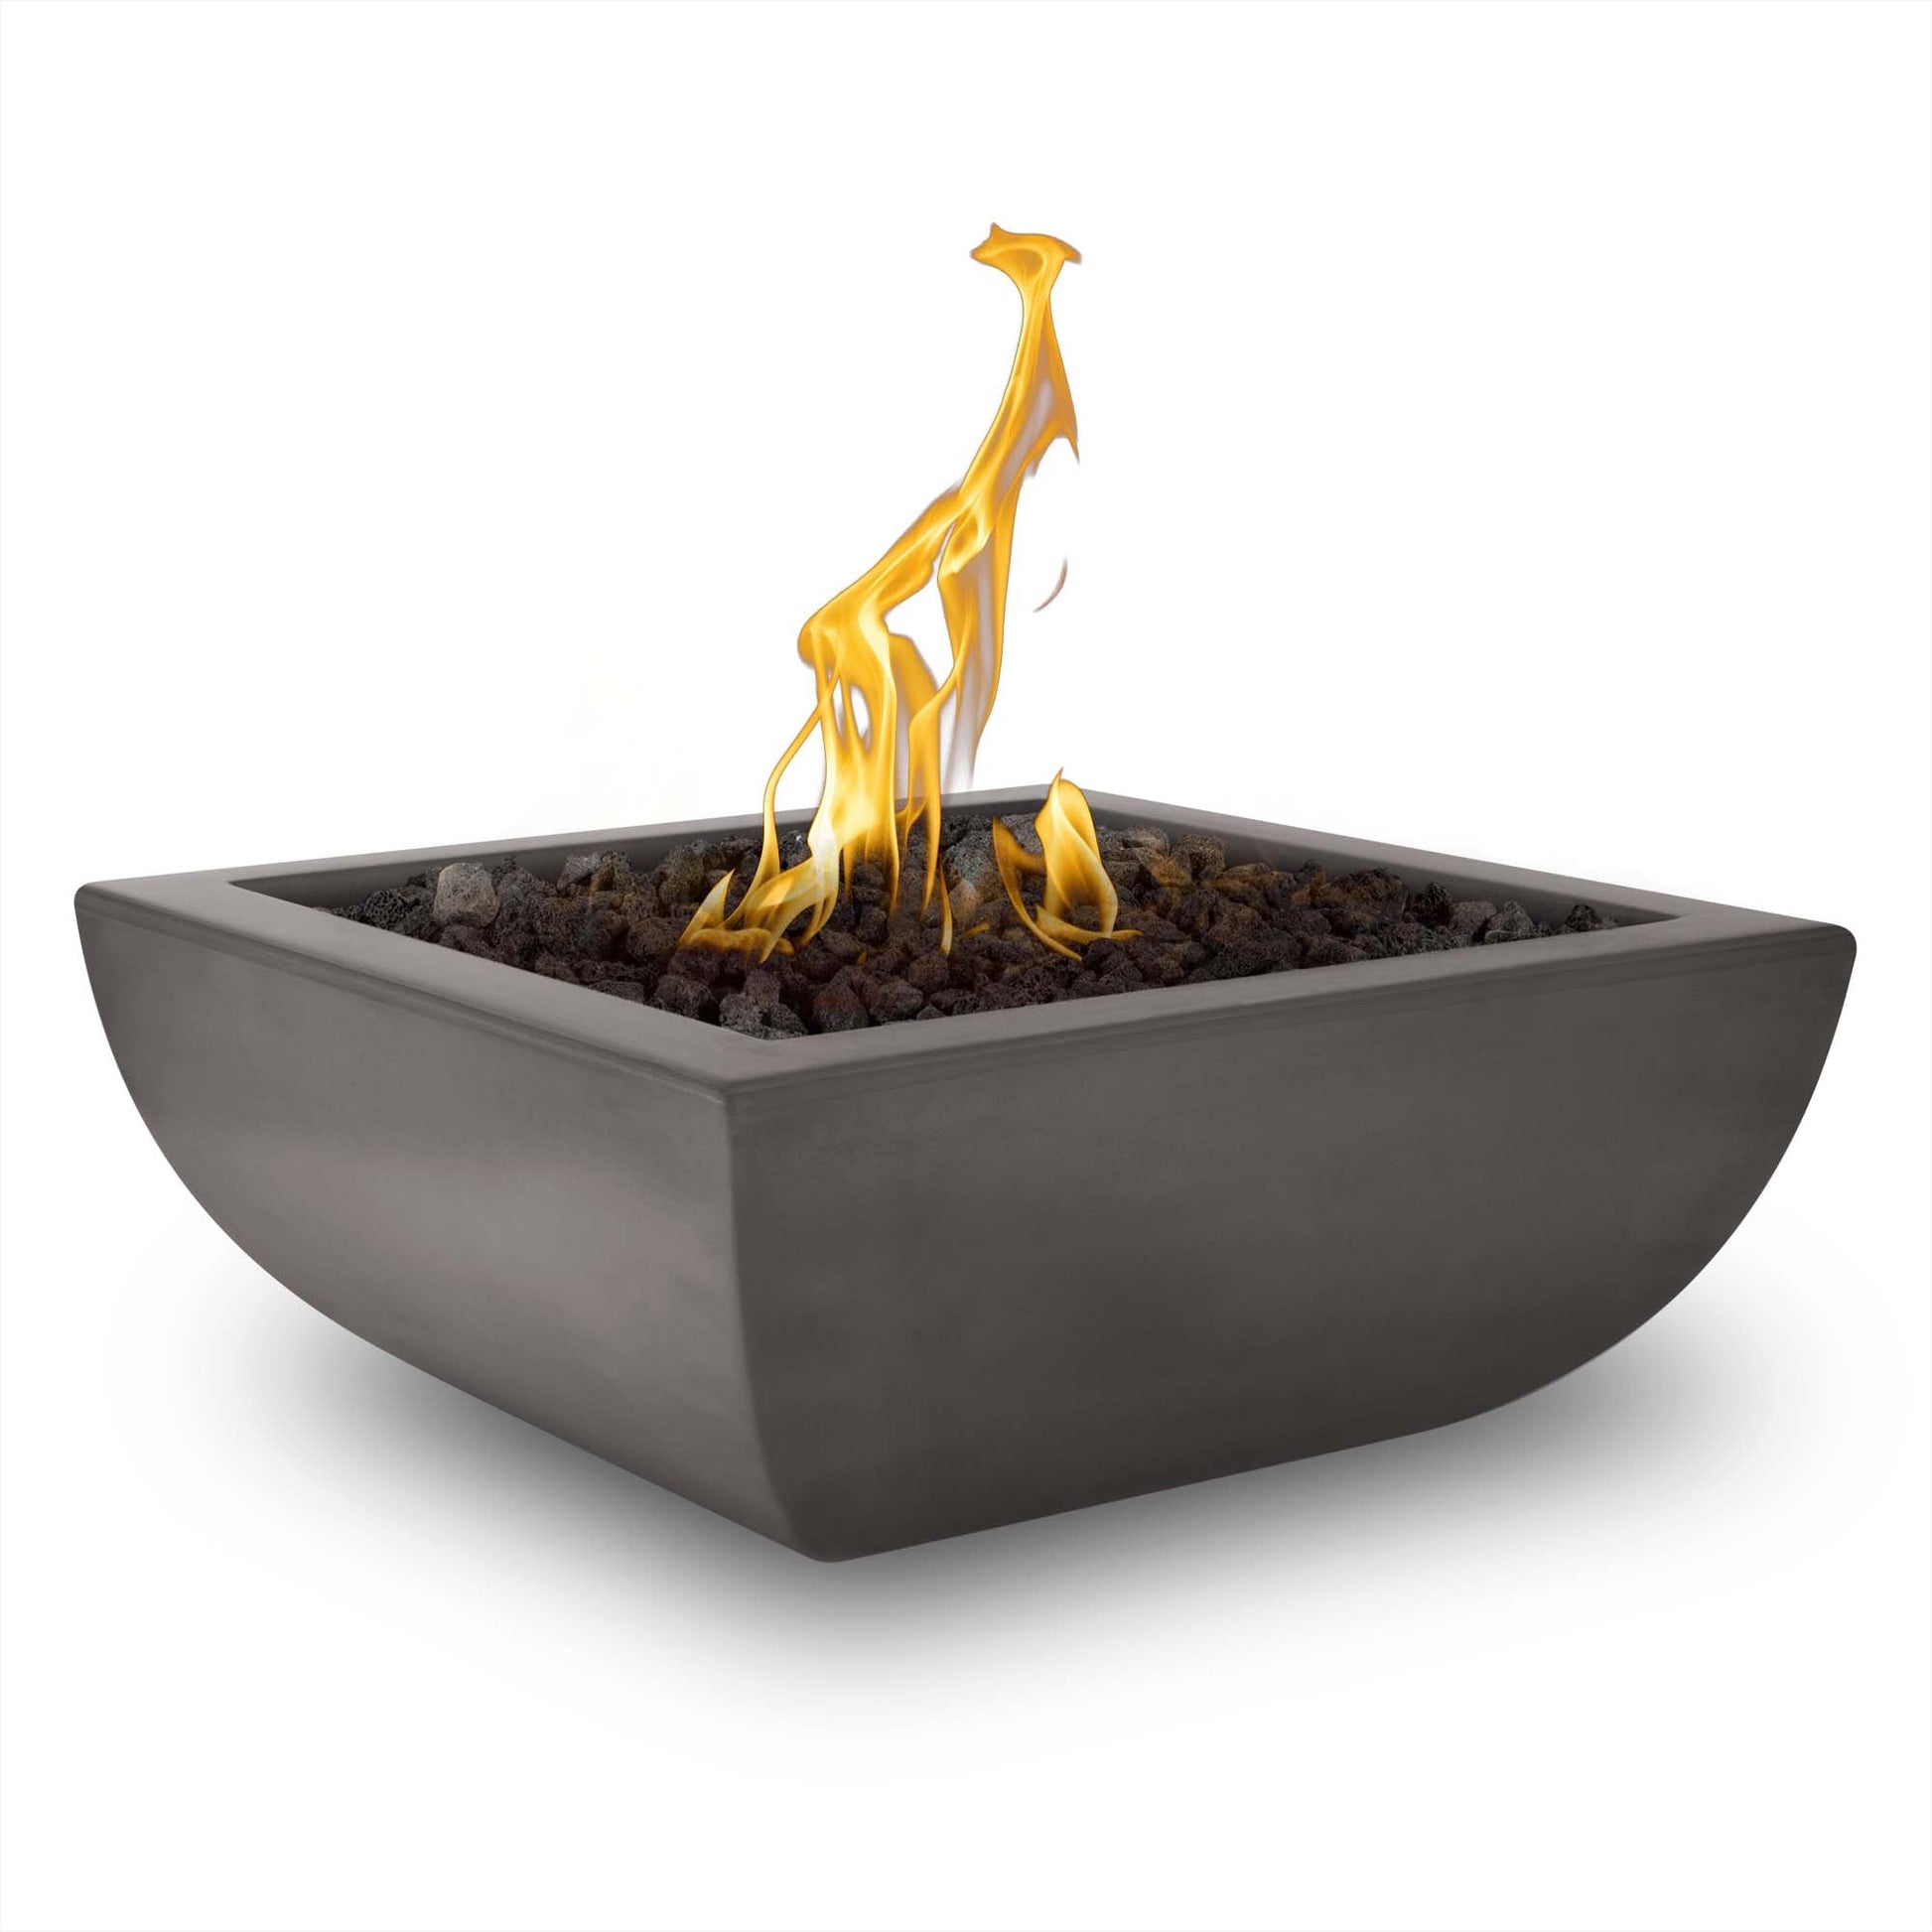 The Outdoor Plus Square Avalon 24" Rustic Moss Stone GFRC Concrete Liquid Propane Fire Bowl with Match Lit with Flame Sense Ignition